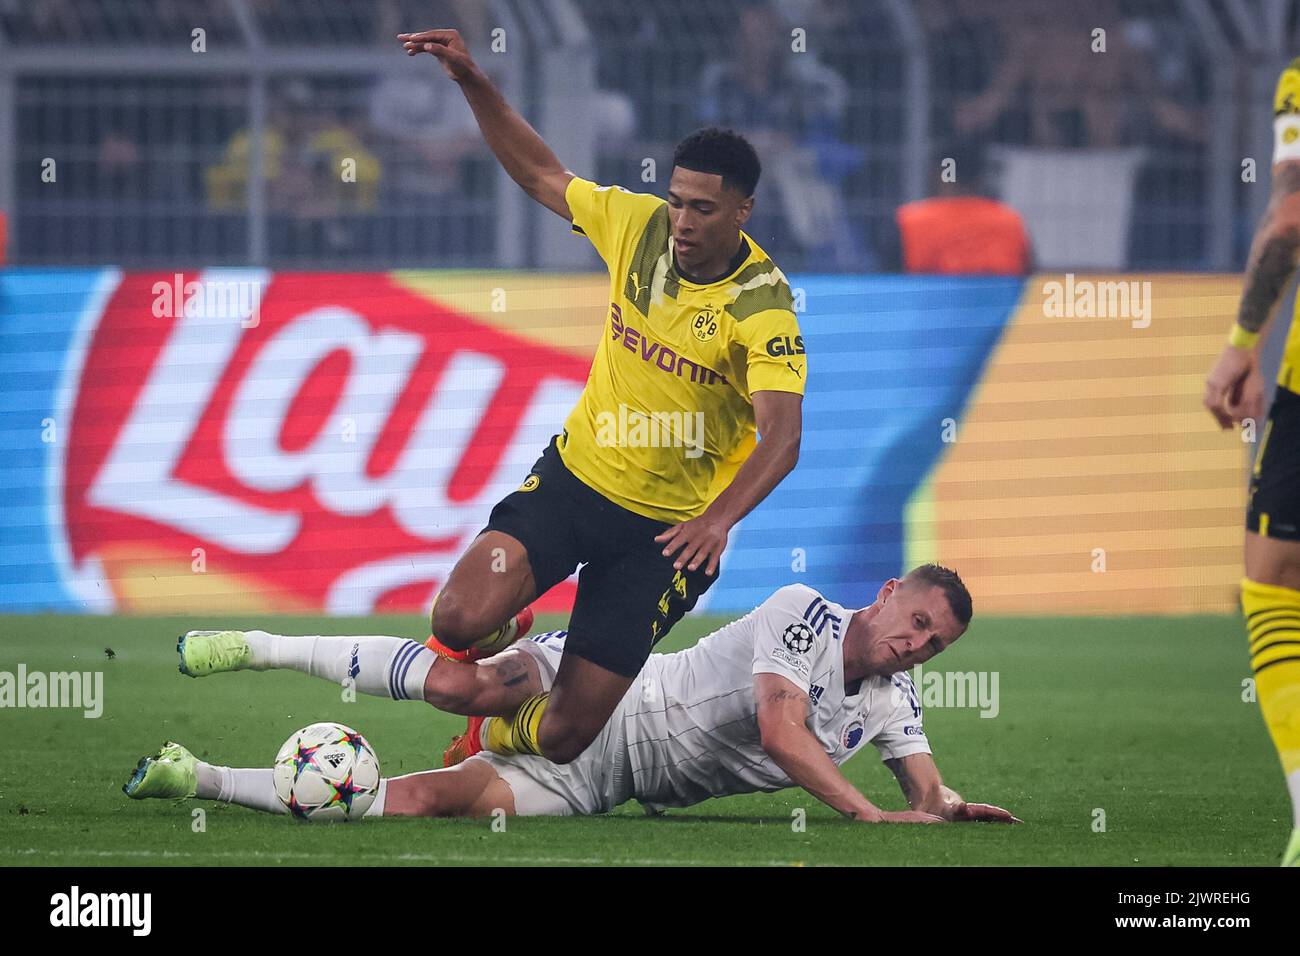 Dortmund, Germany. 06th Sep, 2022. DORTMUND, GERMANY - SEPTEMBER 6: Jude Bellingham of Borussia Dortmund is fouled by Lukas Lerager of FC Copenhagen during the UEFA Champions League Group G match between Borussia Dortmund and FC Copenhagen at the Signal Iduna Park on September 6, 2022 in Dortmund, Germany (Photo by Marcel ter Bals/Orange Pictures) Credit: Orange Pics BV/Alamy Live News Stock Photo